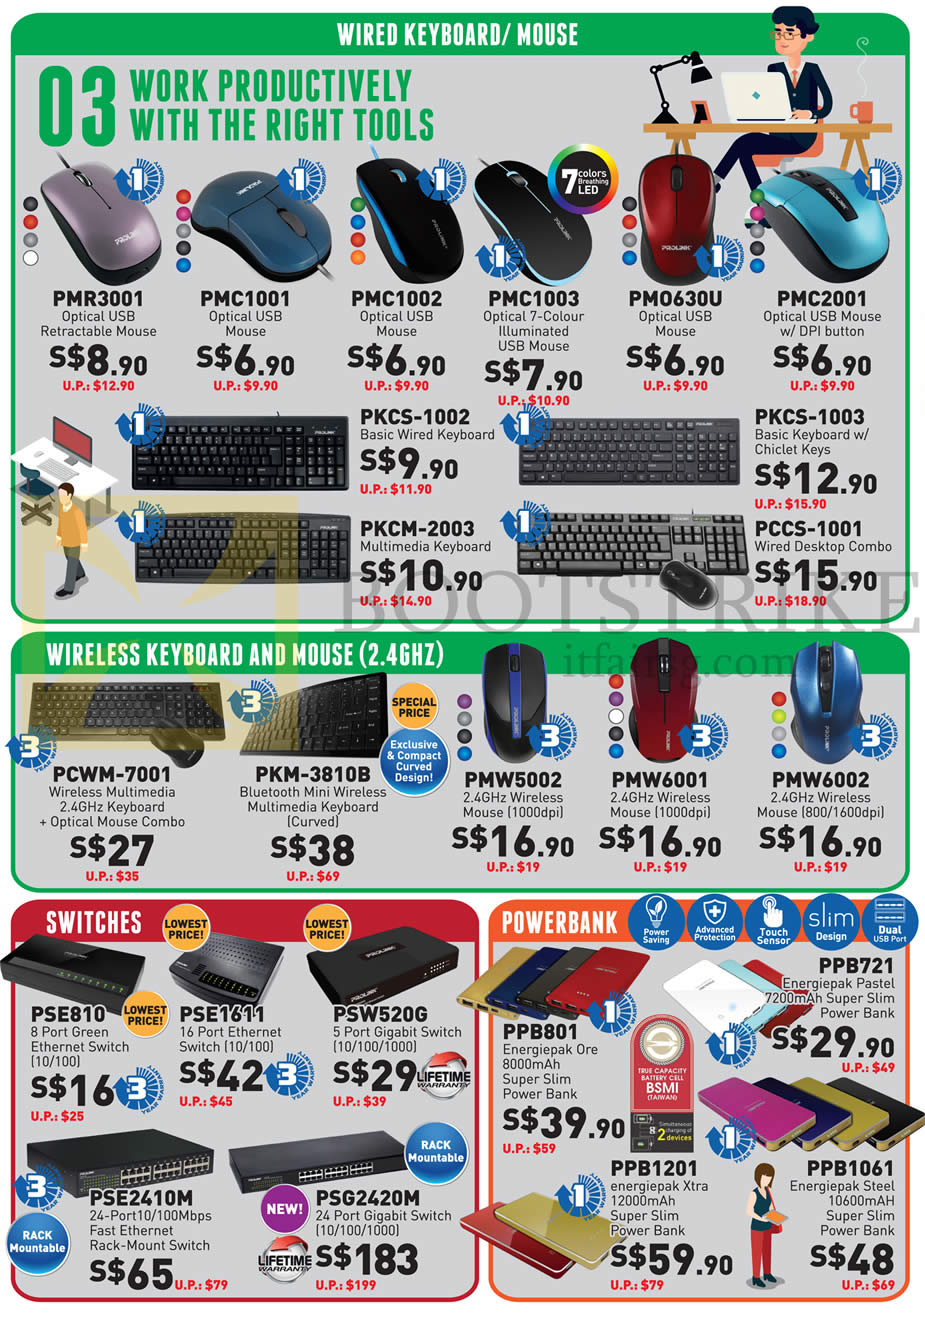 COMEX 2015 price list image brochure of Prolink Networking, Wireless Keyboard, Mouse, Switches, Powerbank, PMR3001, PMC1001, PMC1002, PMC1003, PM0630U, PMC2001, PMW6001, PMW6002, PSW520G, PSE1611